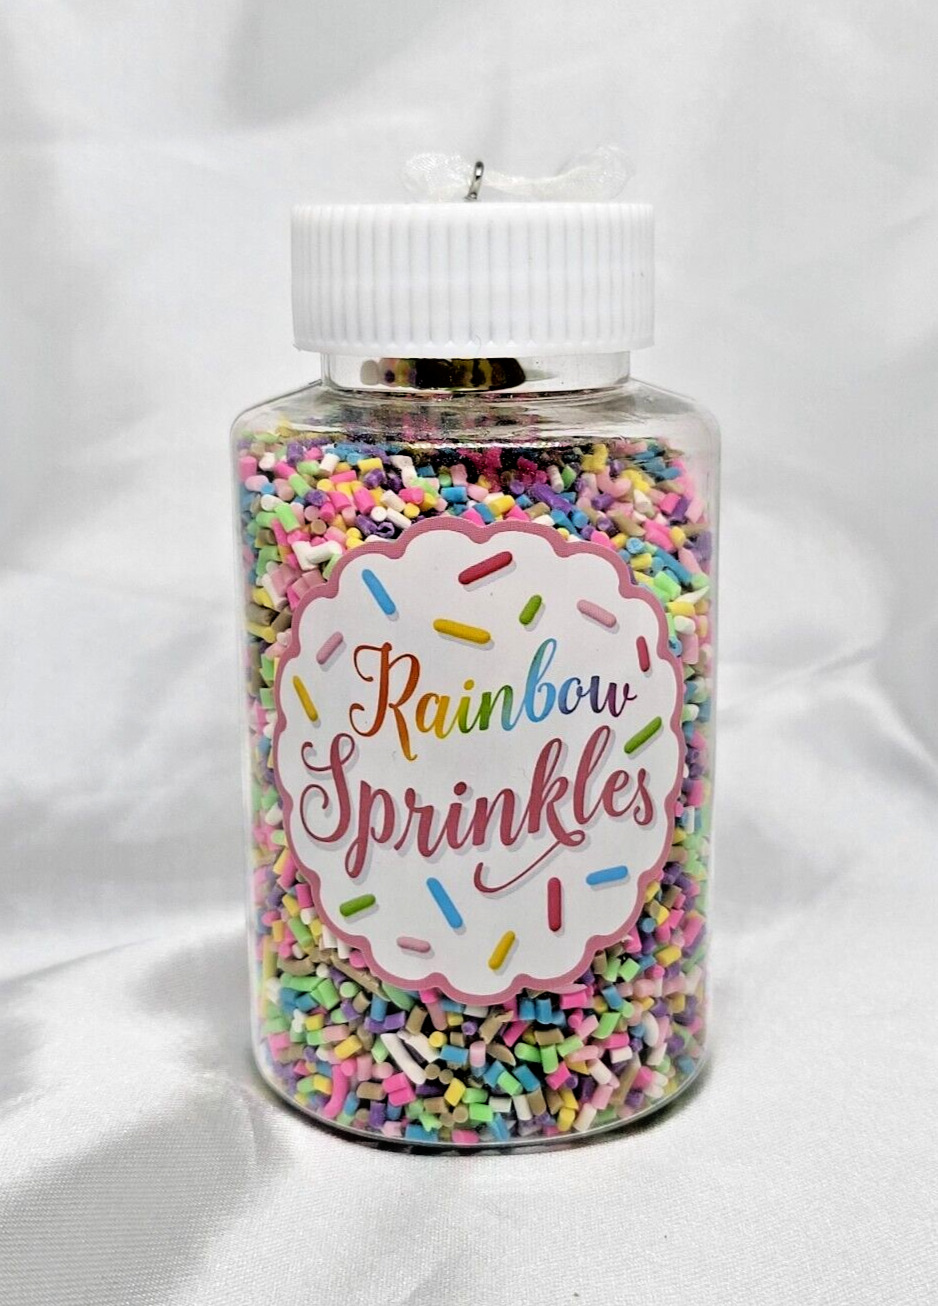 Sprinkles baking cake cookie ornament plastic 4 inch Tall